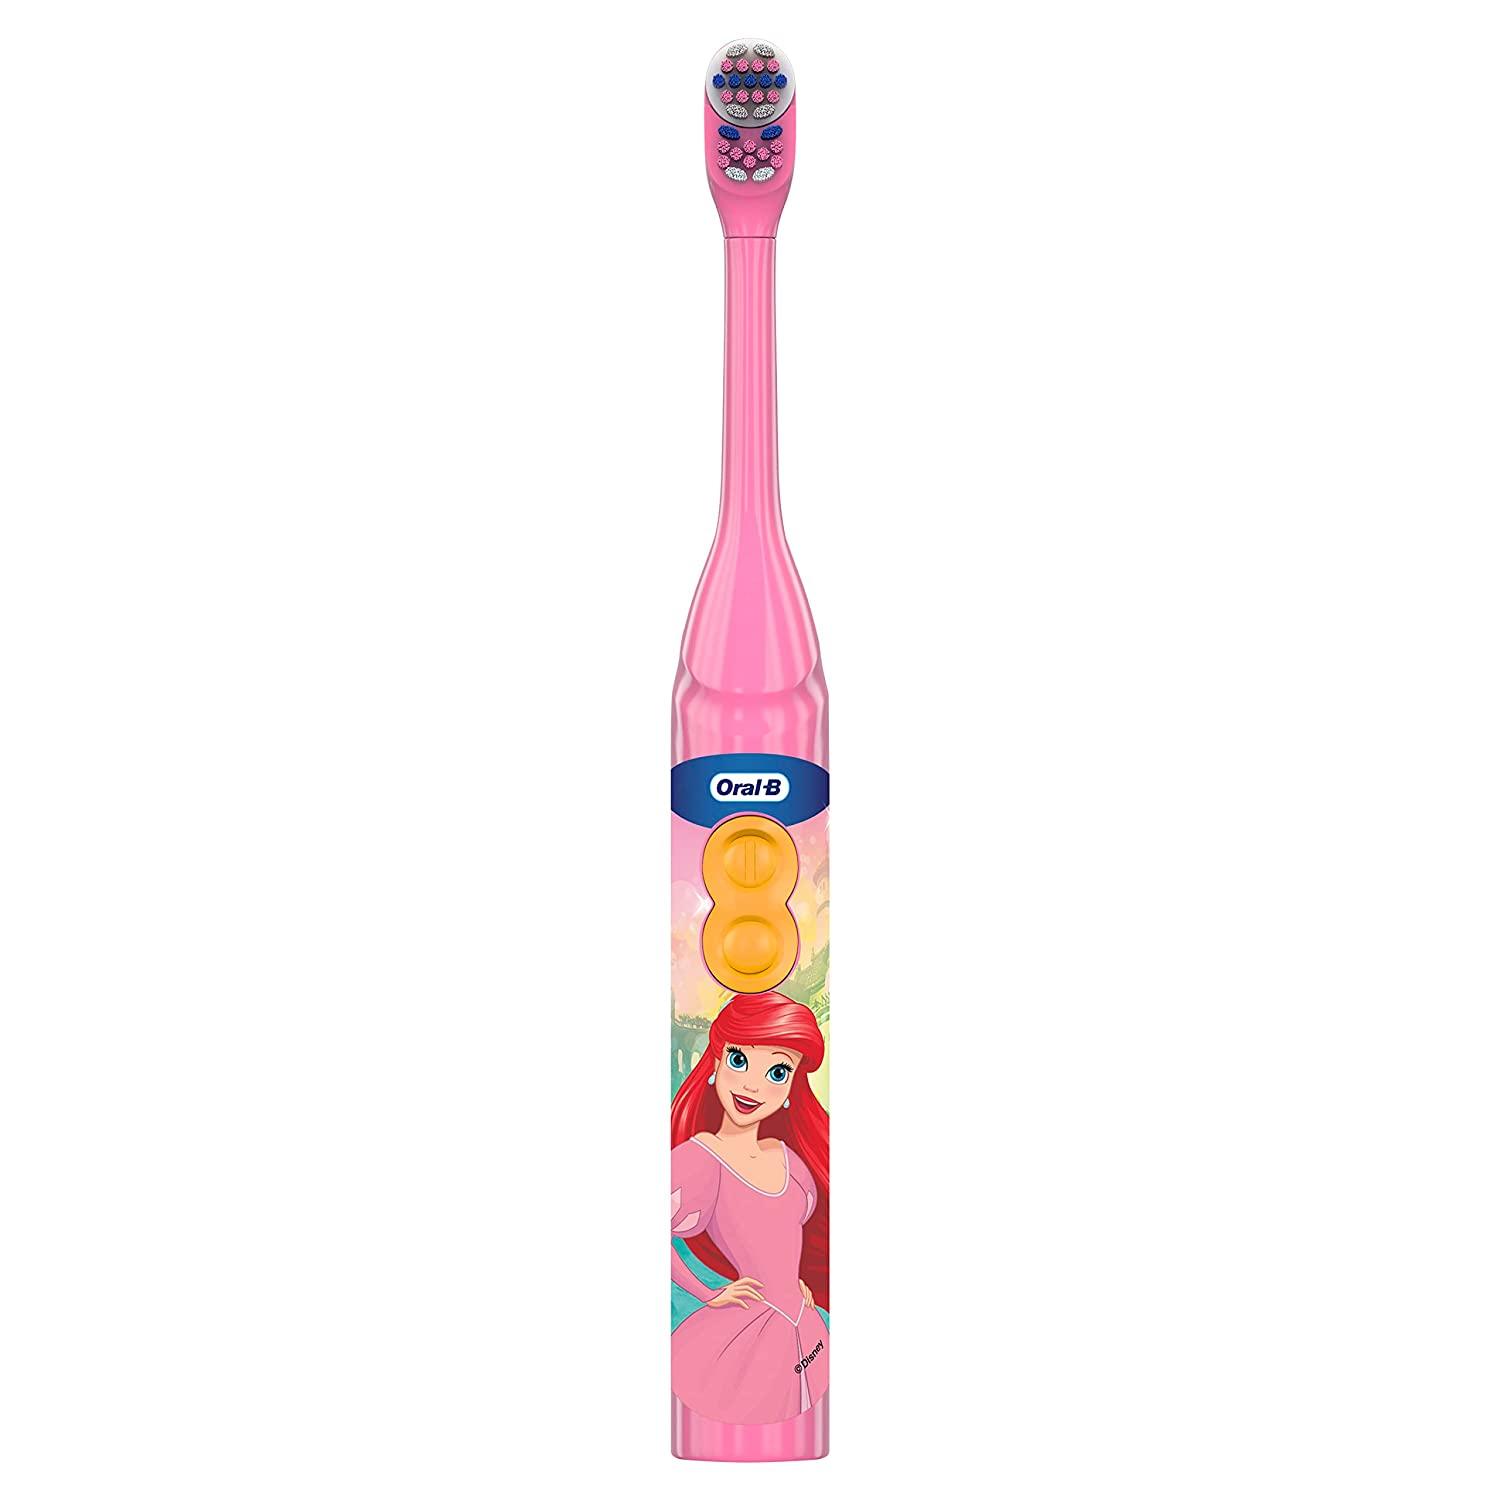 Oral-B Kid's Battery Toothbrush Featuring Disney's Little Mermaid, Soft Bristles - BumbleToys - 5-7 Years, Baby Saftey & Health, Girls, Oral-B, Pre-Order, Toothbrush